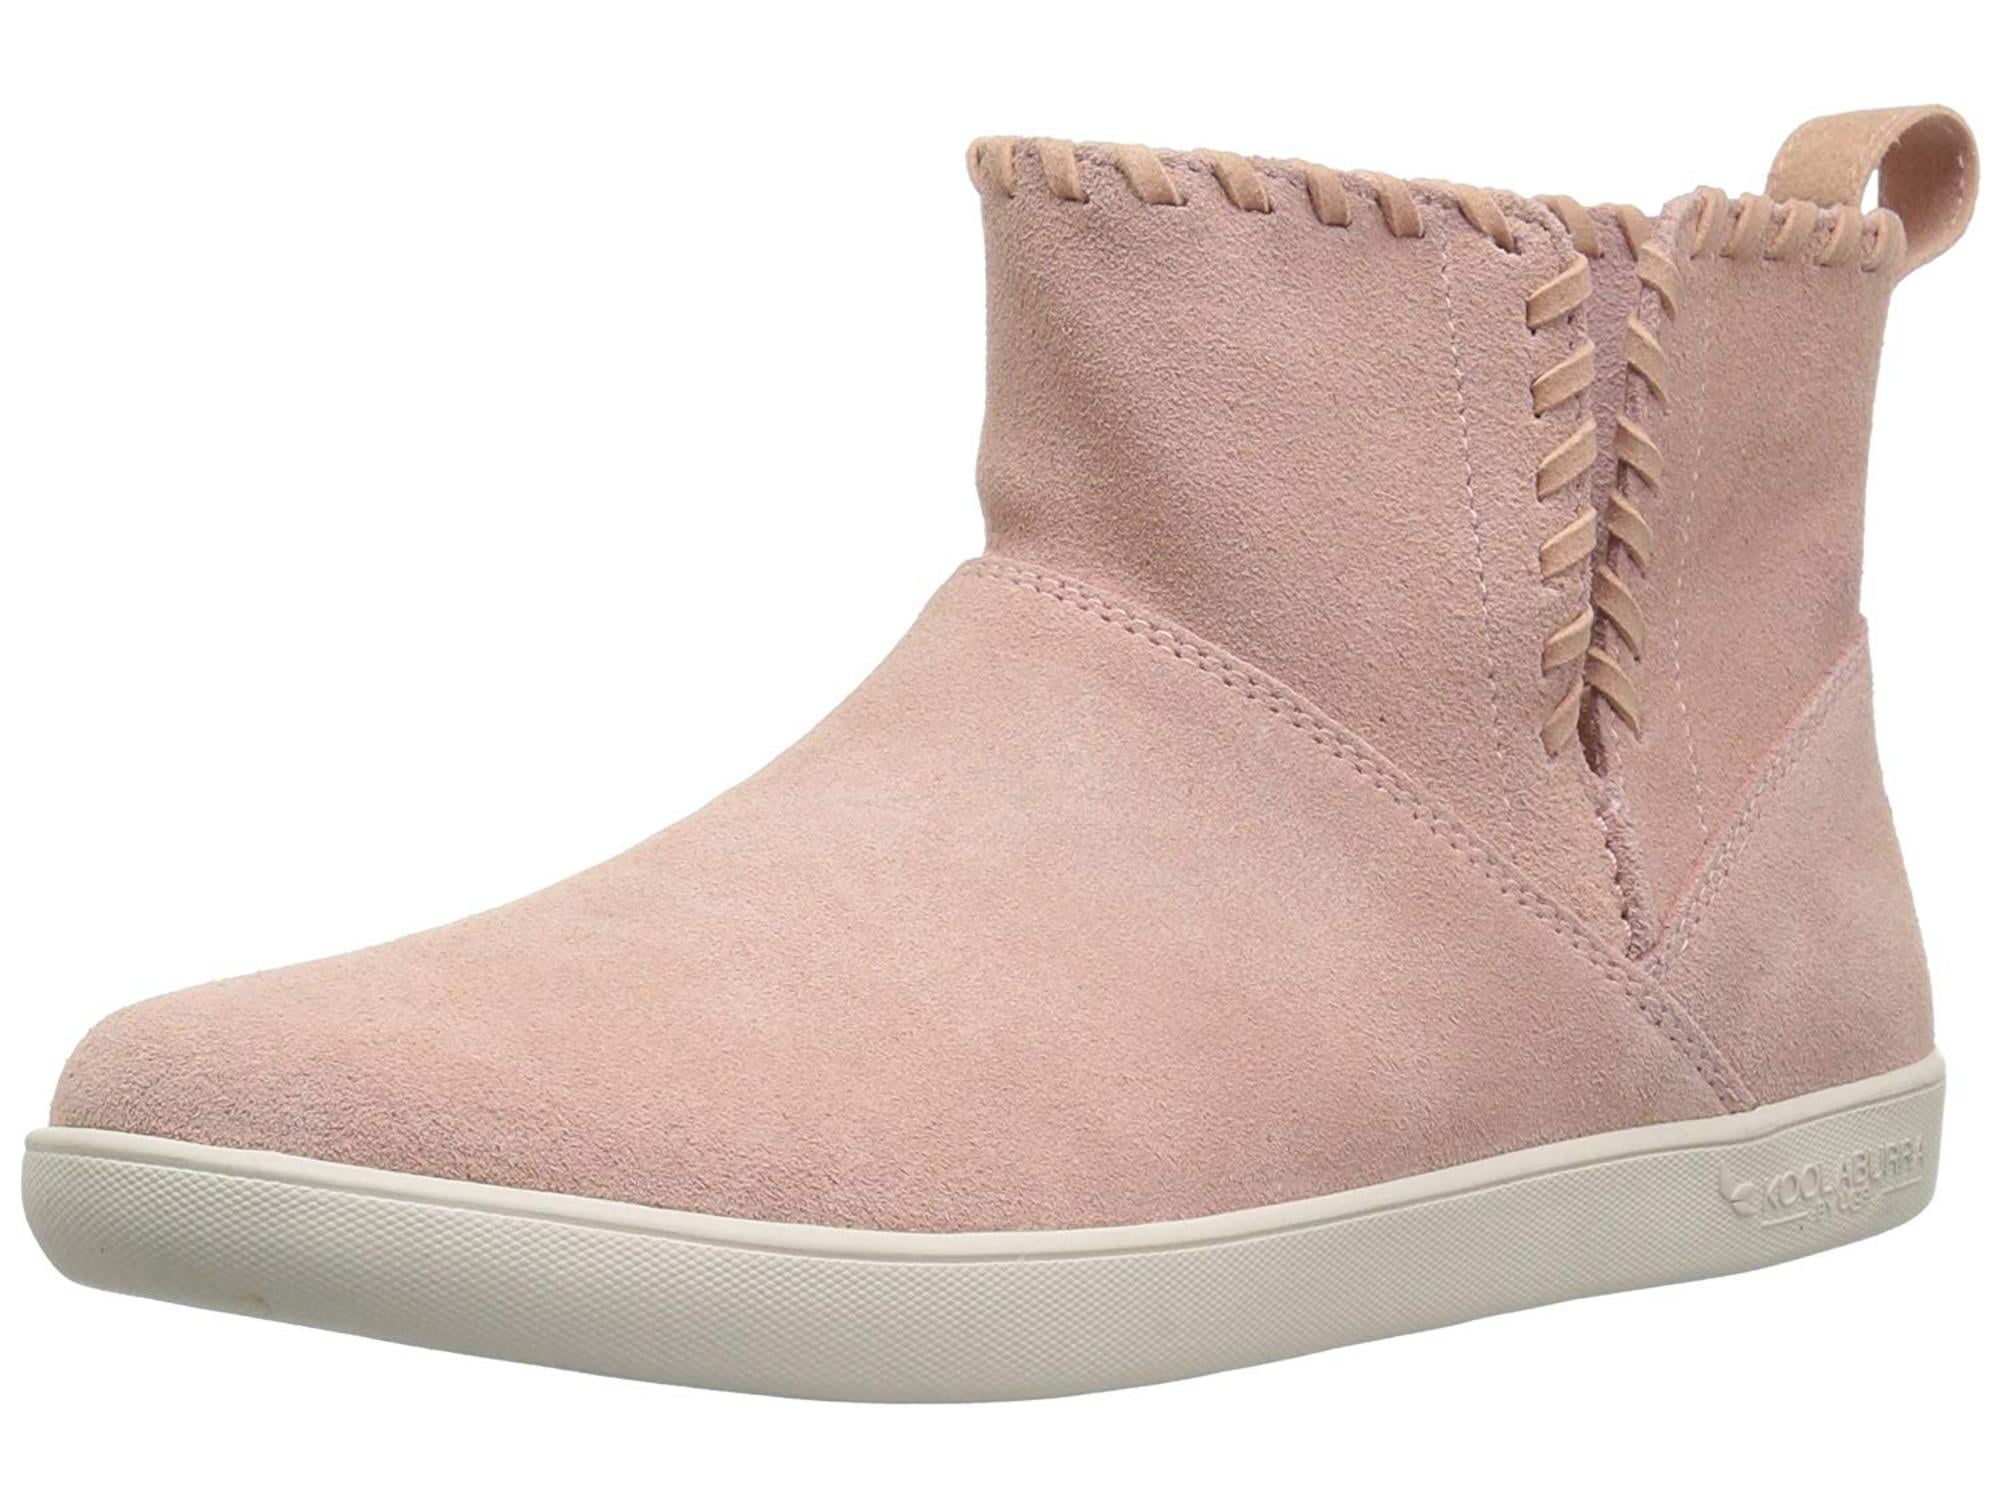 koolaburra by ugg rylee women's ankle boots